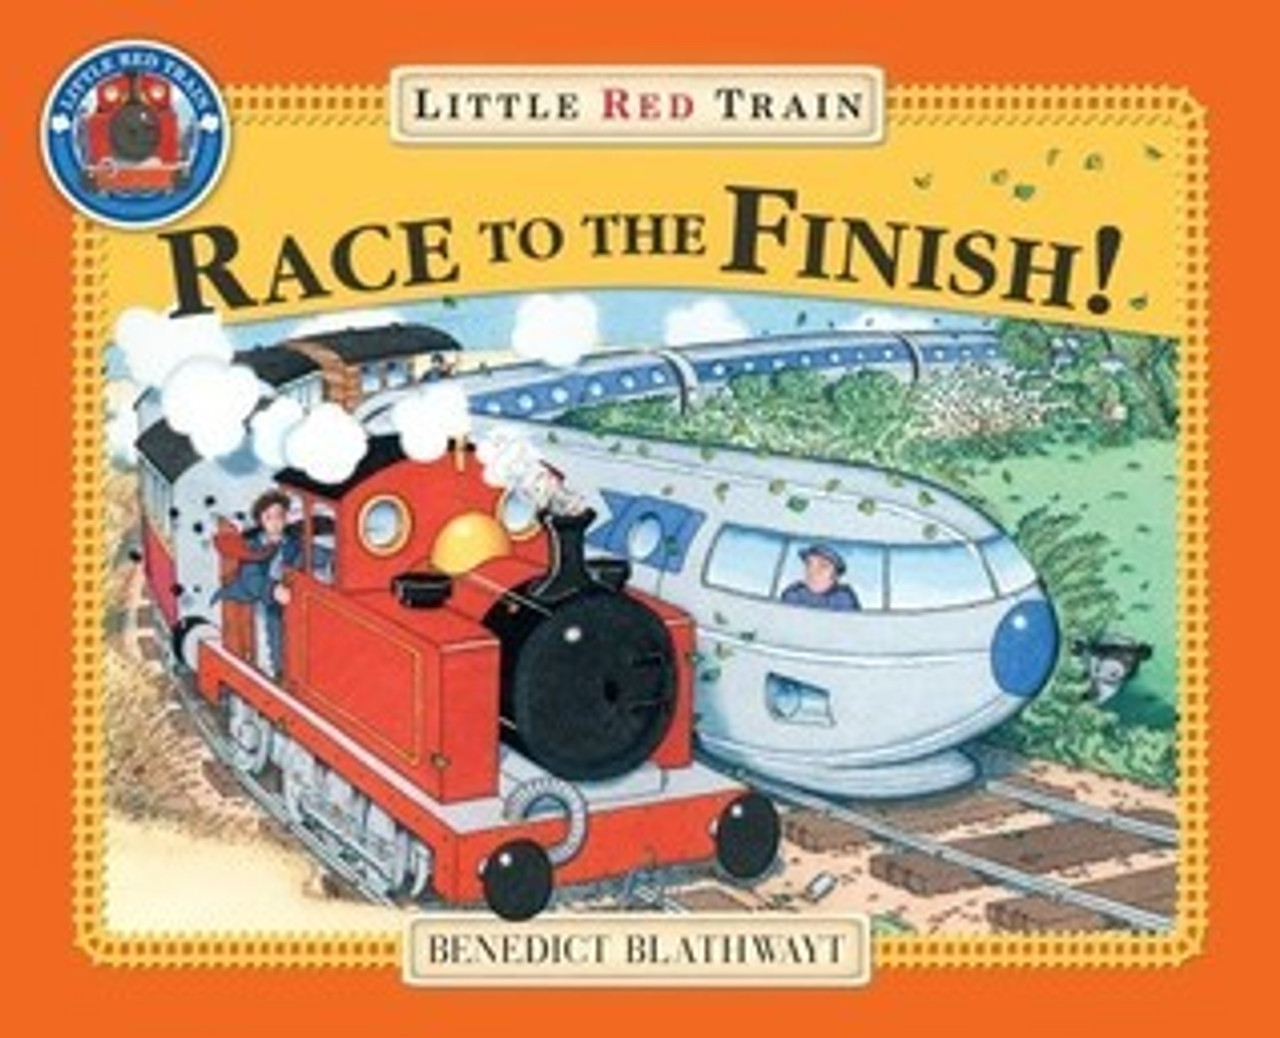 Benedict Blathwayt / Little Red Train Race to the Finish! (Children's Picture Book)